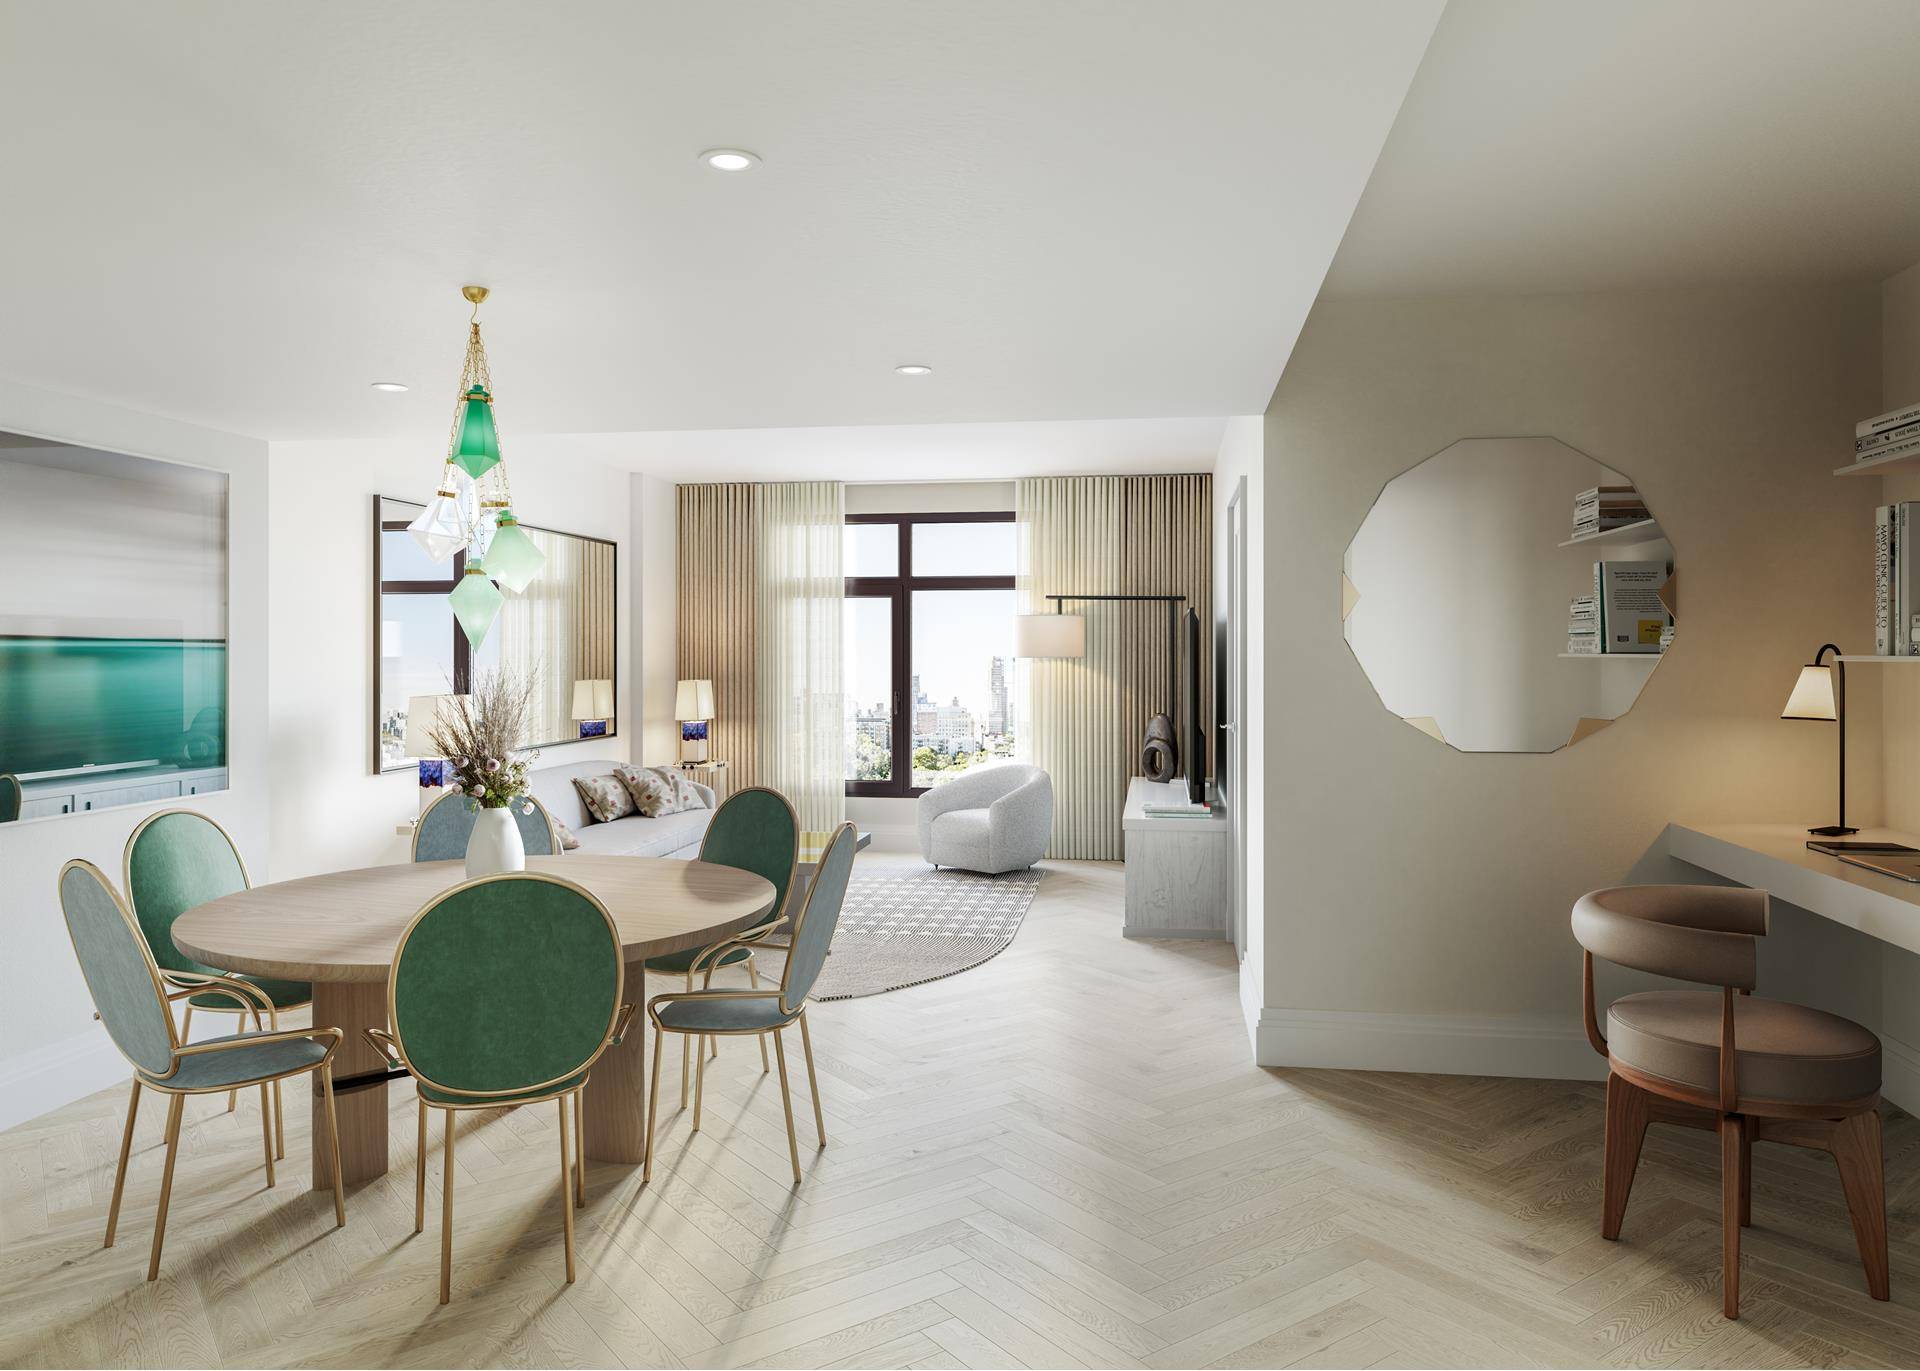 Sales Gallery Now Open By Appointment Introducing residence 7P at 300 West, a northwestern facing studio offering an open concept living area that boasts custom White Oak herringbone flooring, central ...